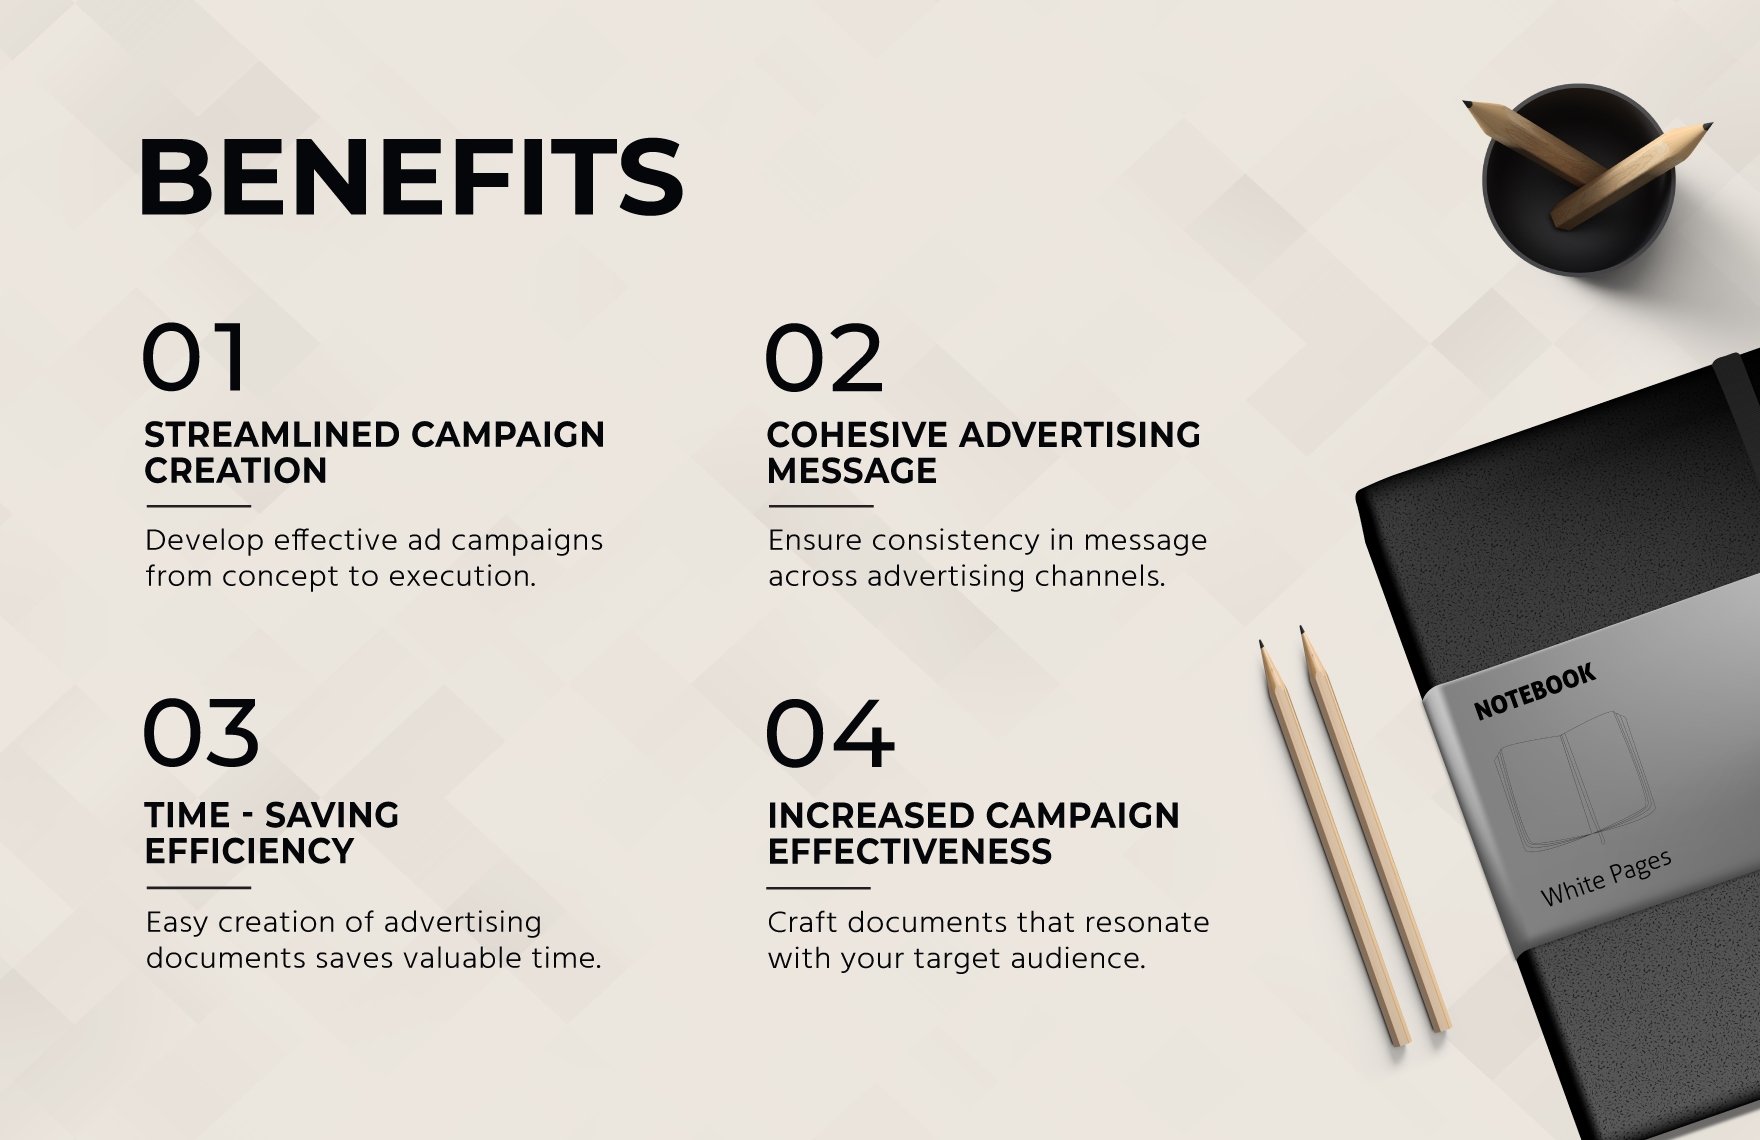 Campaign Hashtag Advertising Strategy Template